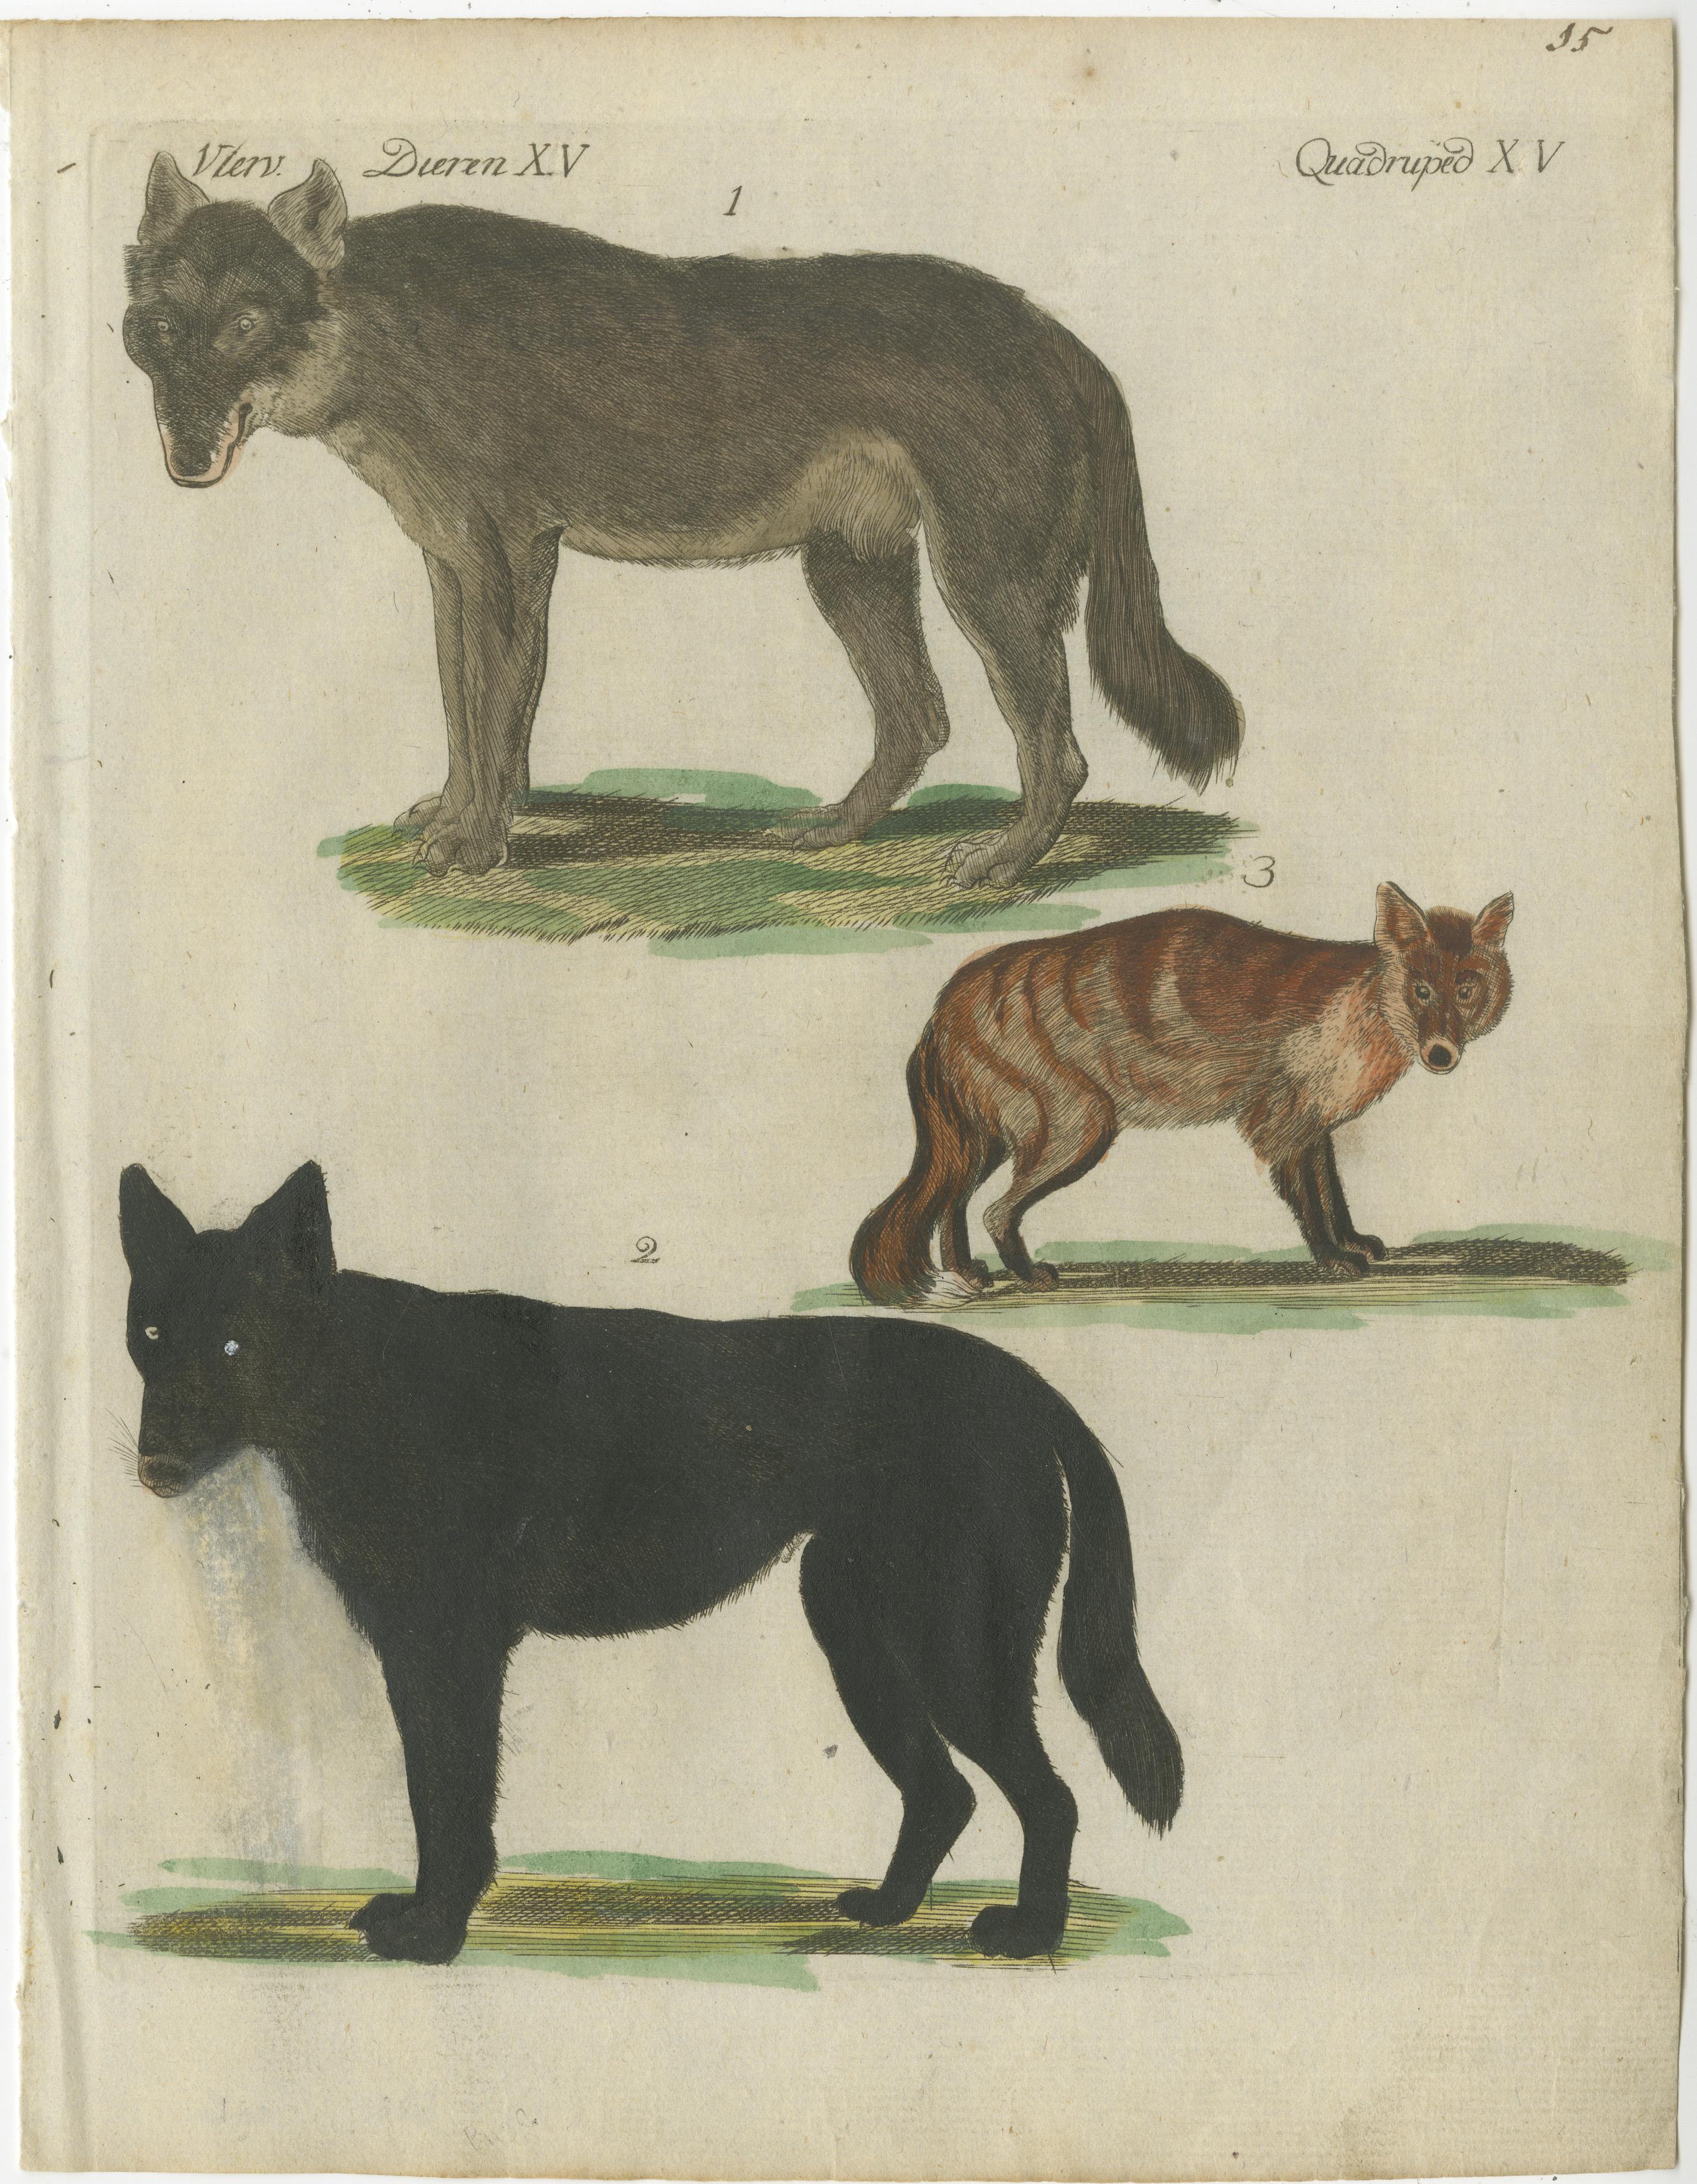 Original antique print of wolves and a fox. This engraved print originates from a very rare unknown Dutch work. The plates are similar to the plates in the famous German work: ‘Bilderbuch fur Kinder' by F.J. Bertuch, published 1790-1830 in Weimar.